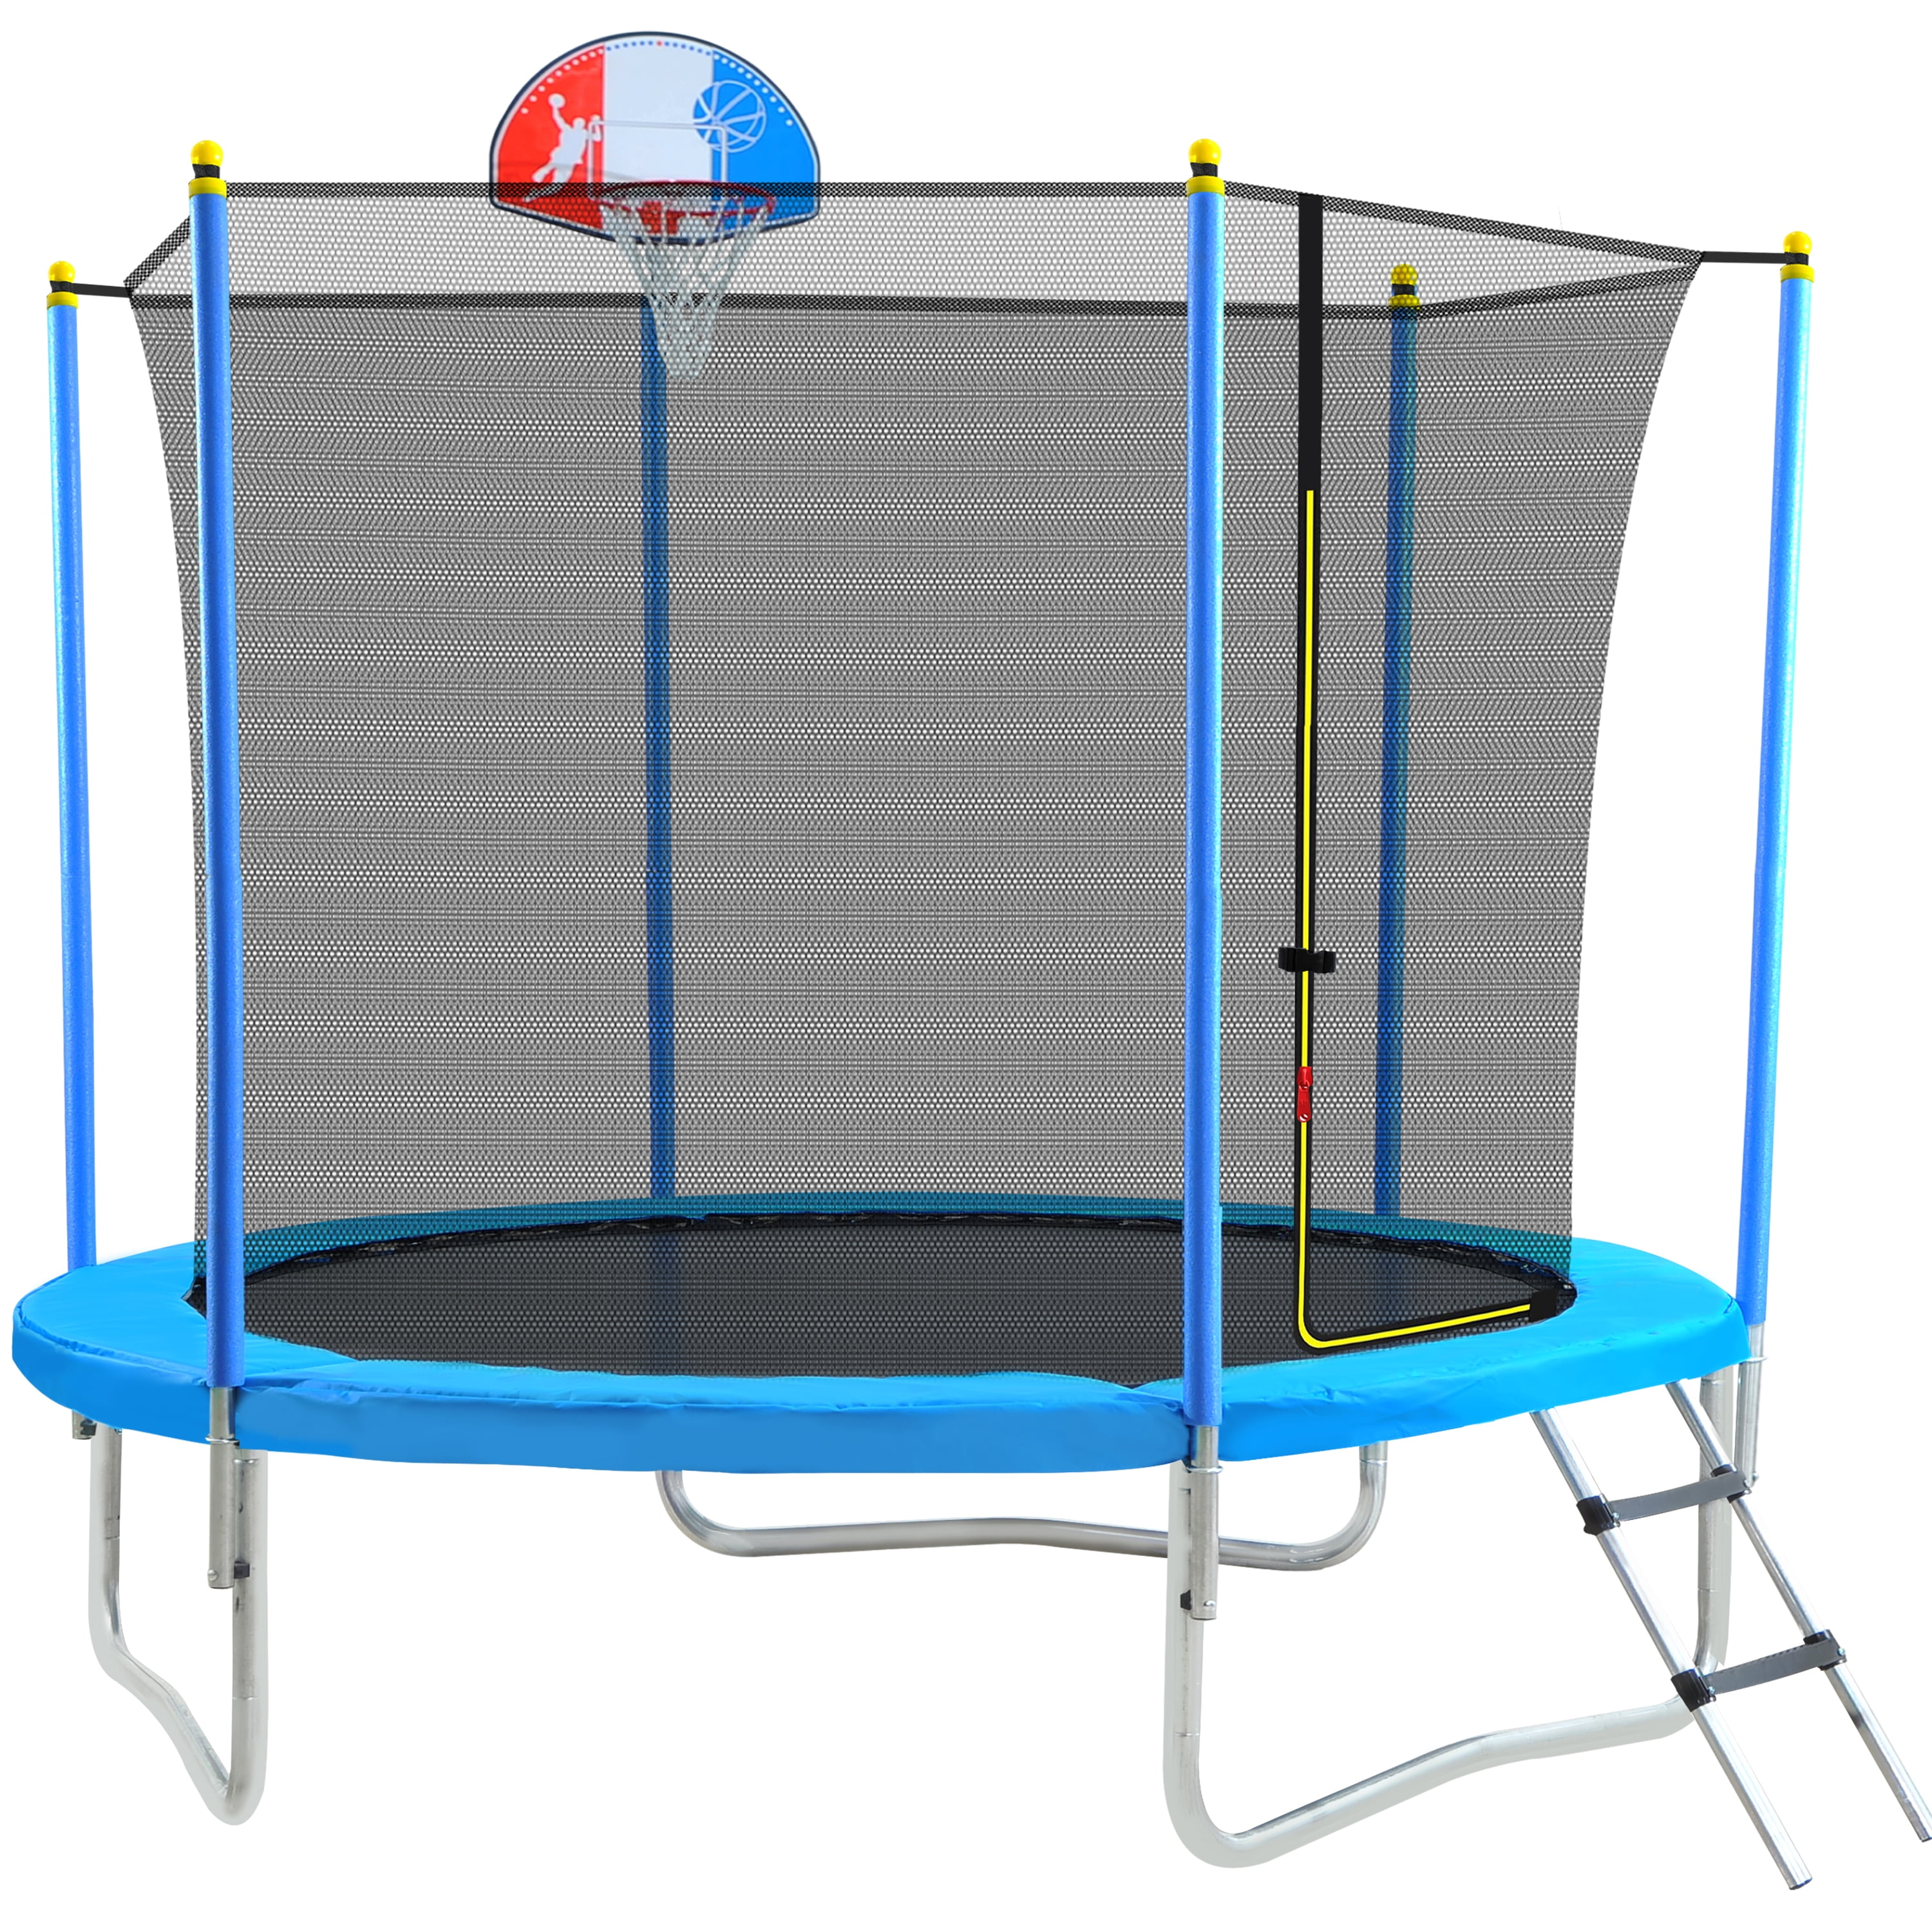 8FT Outdoor Premium Trampoline With Enclosure Safety Net Padded Poles Anchor Kit 